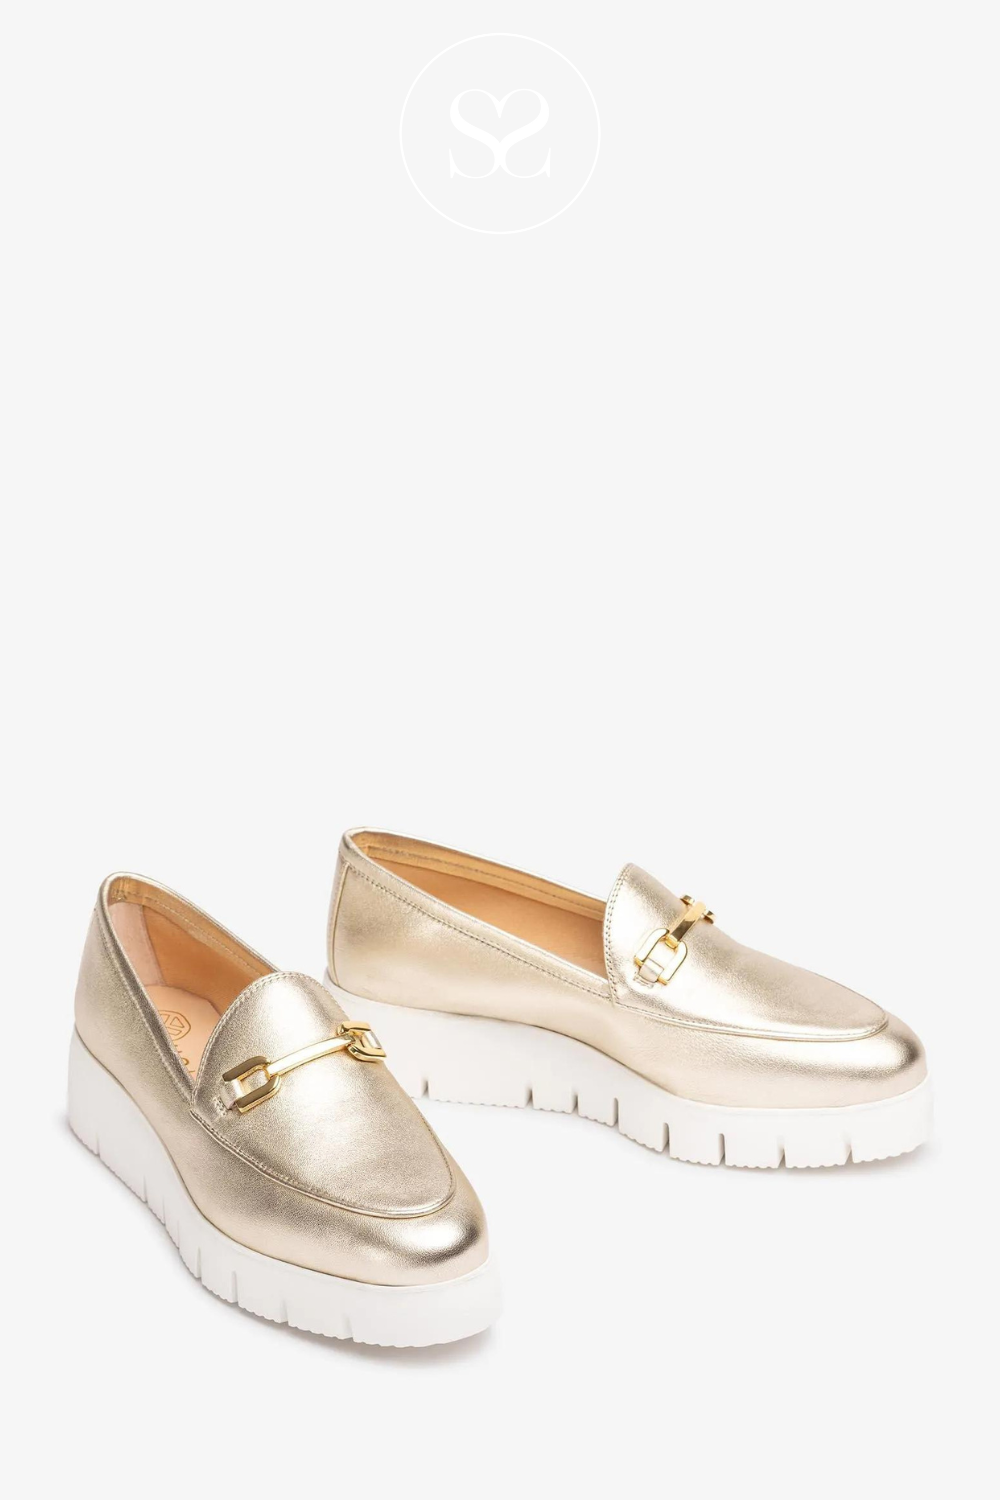 UNISA FAMO GOLD LEATHER WEDGE LOAFER WITH GOLD BUCKLE DETAIL